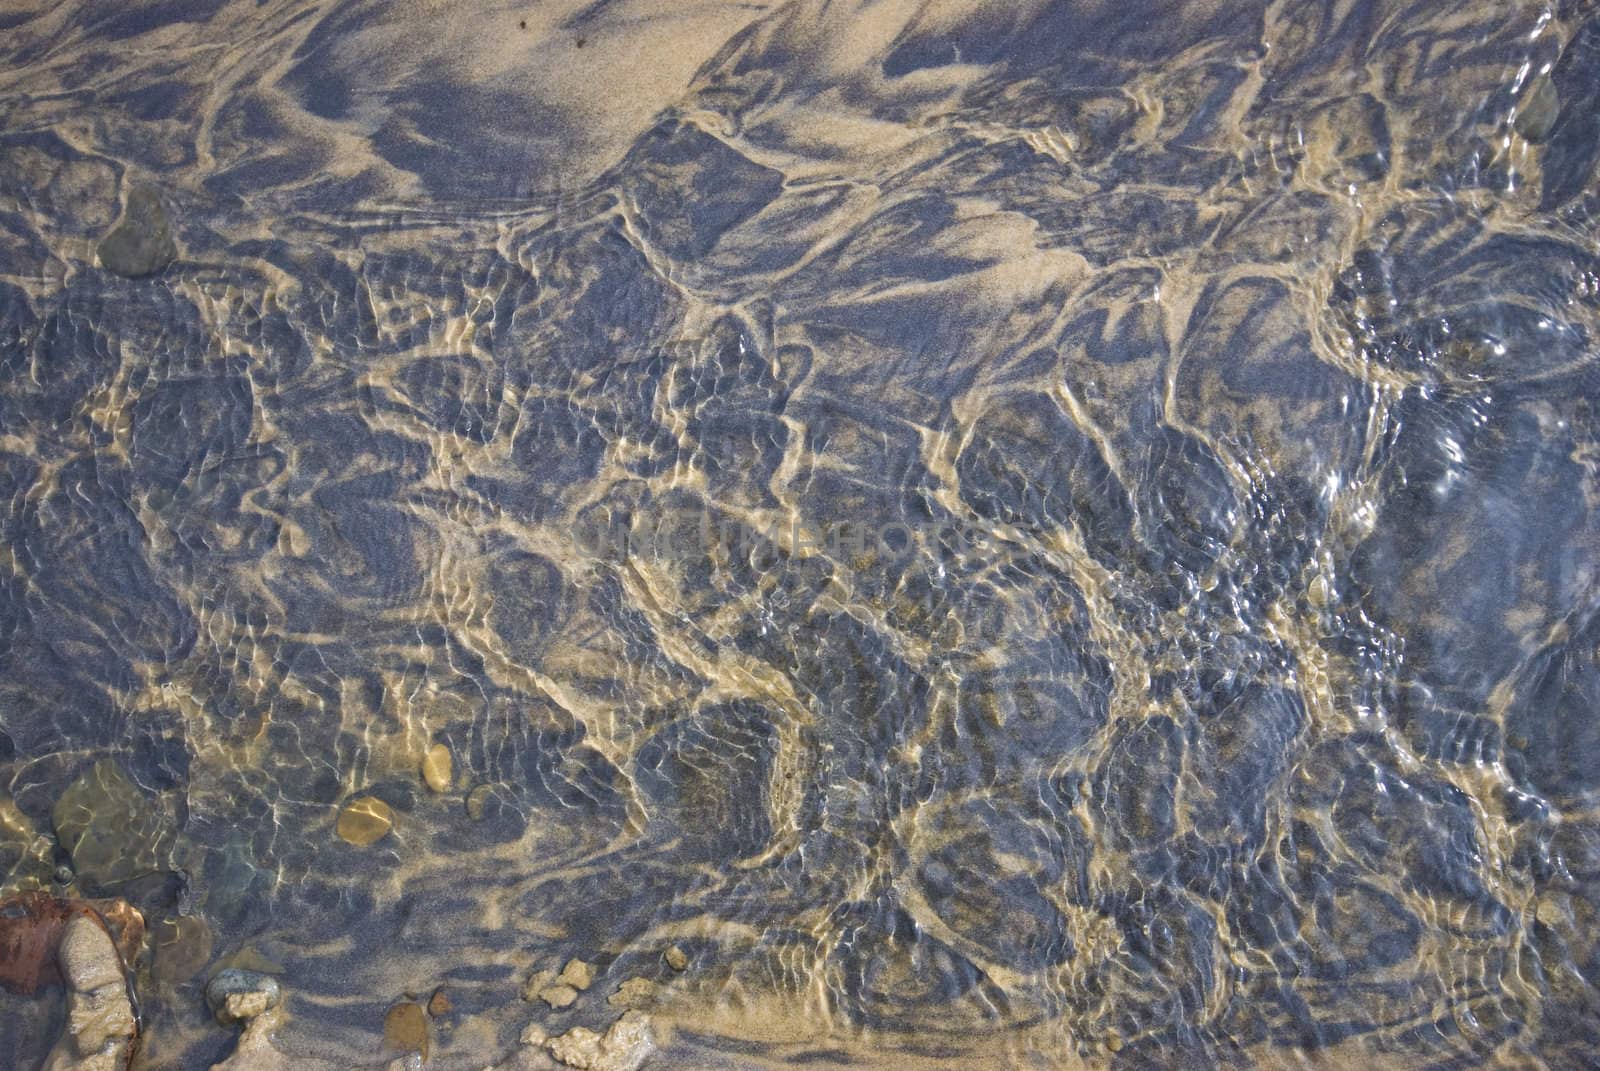 ripples of small waves in low water